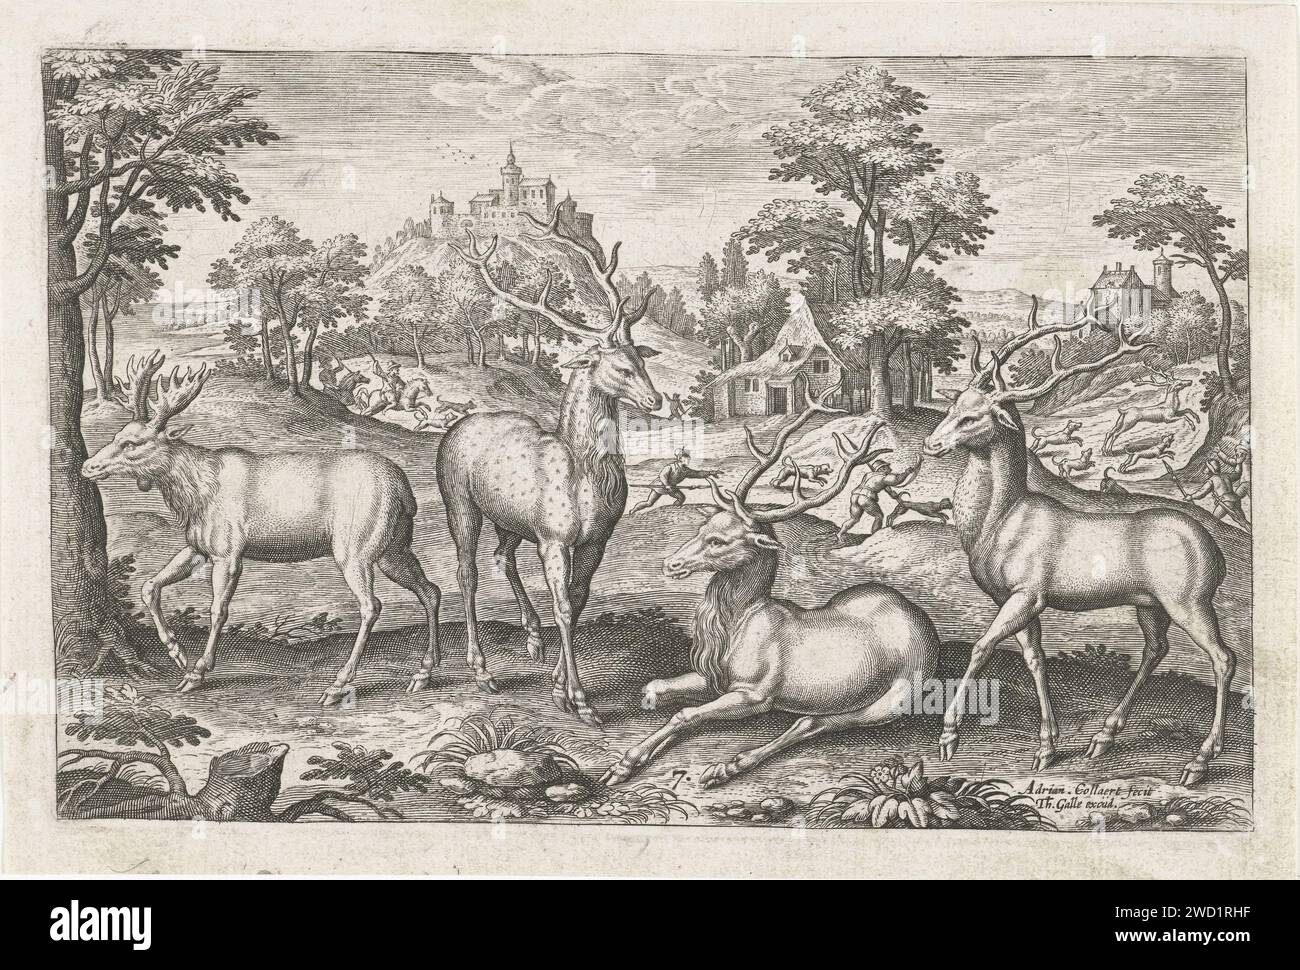 Herten, Adriaen Collaert, 1595 - 1633 print Two deer, a Damhert and a moose in the foreground. A deer show in the background. The print is part of a series with animals as the subject. Antwerp paper engraving hoofed animals: deer. hoofed animals: moose. stag-hunting Stock Photo